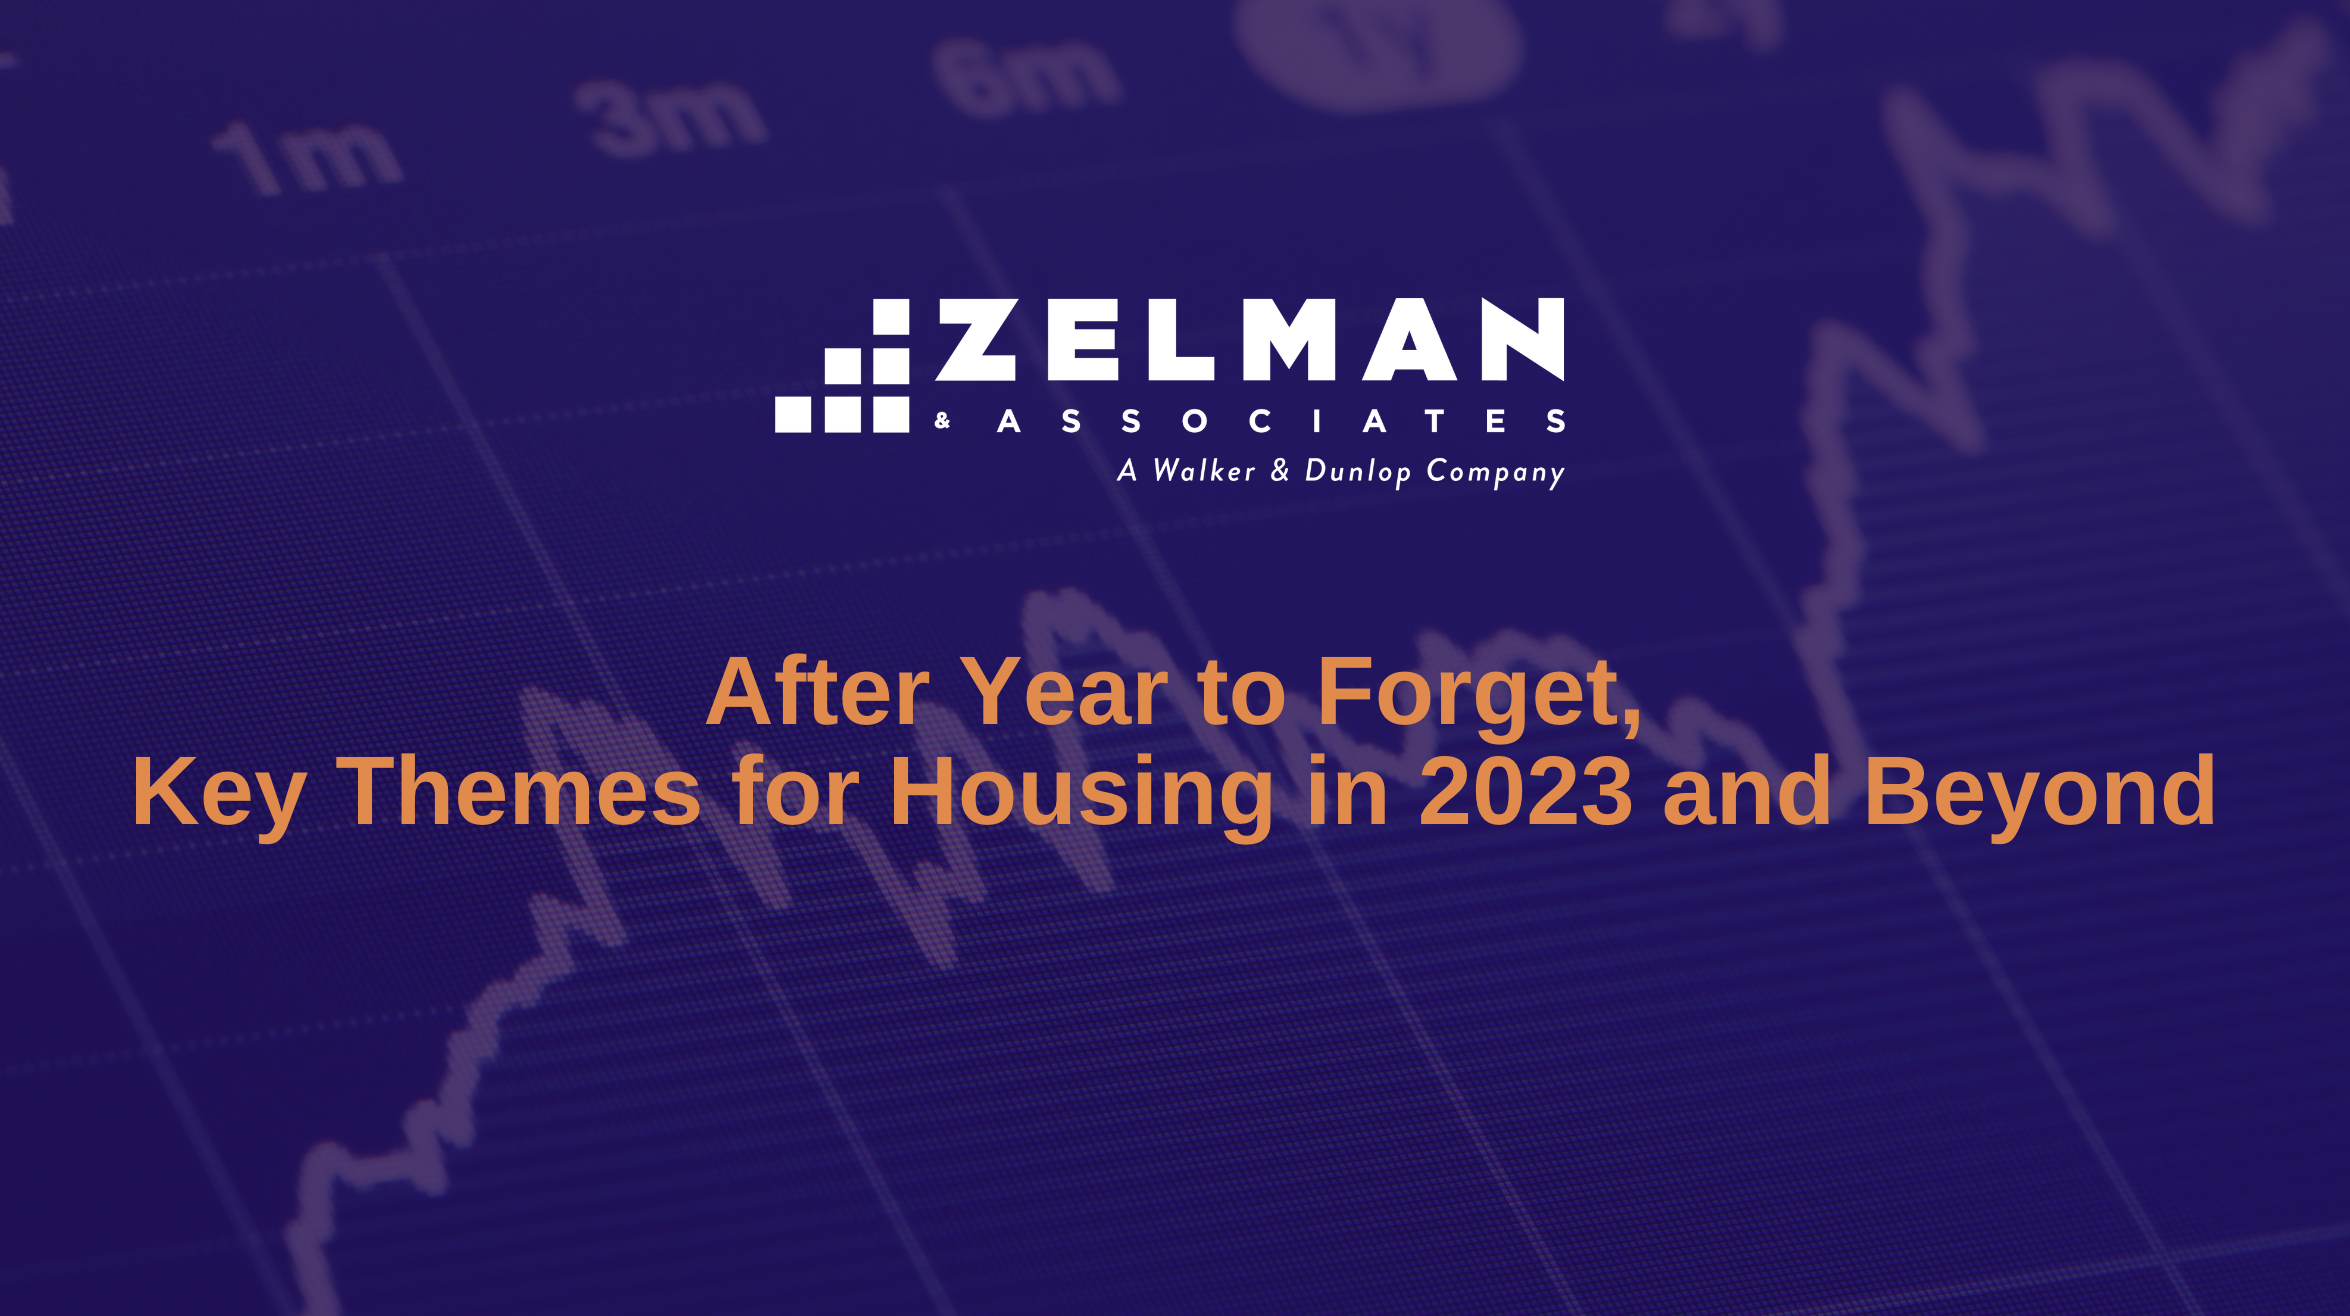 After Year to Forget, Key Themes for Housing in 2023 and Beyond